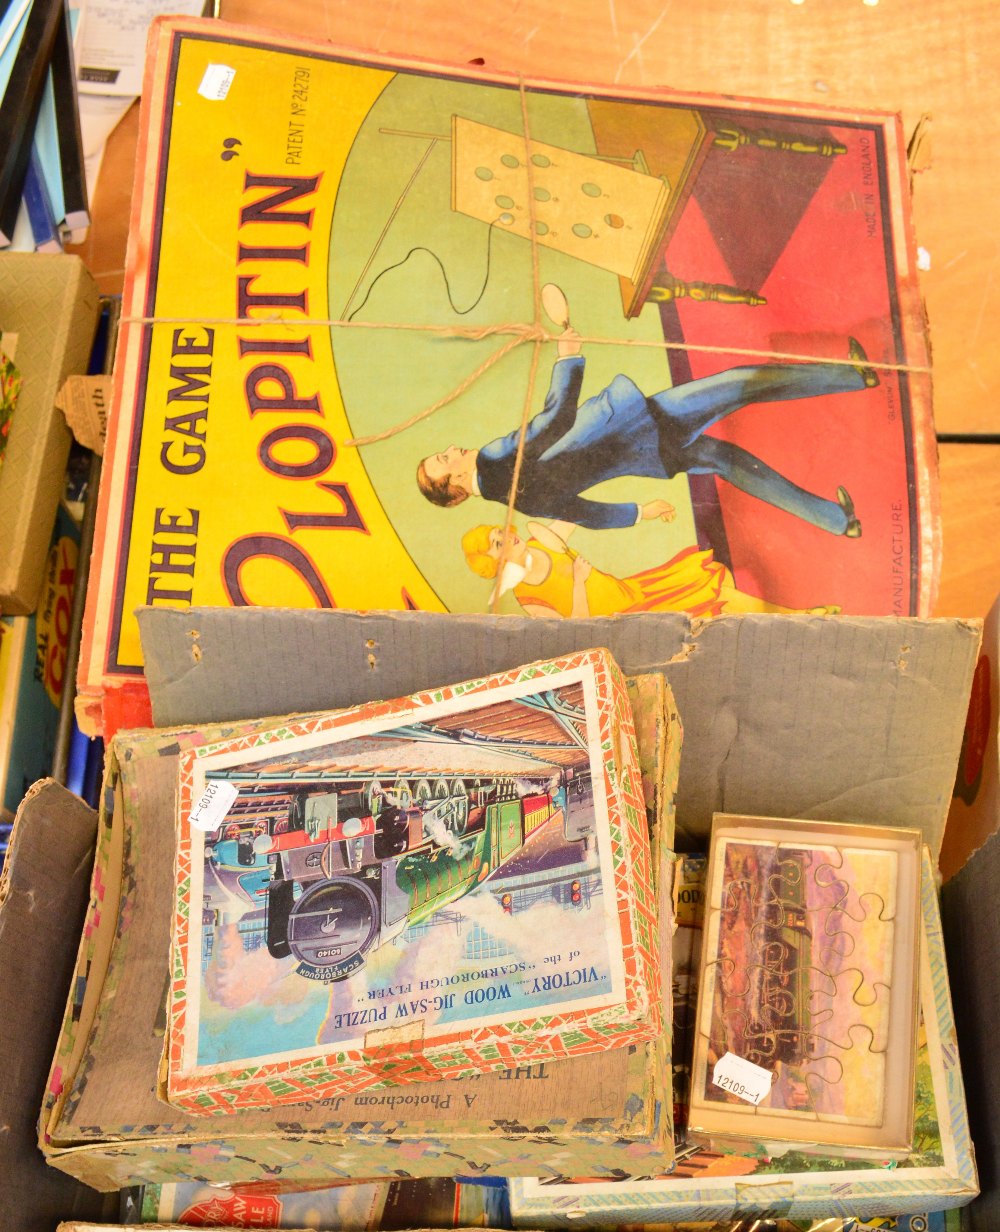 A quantity of vintage games and toys including jigsaw puzzles.